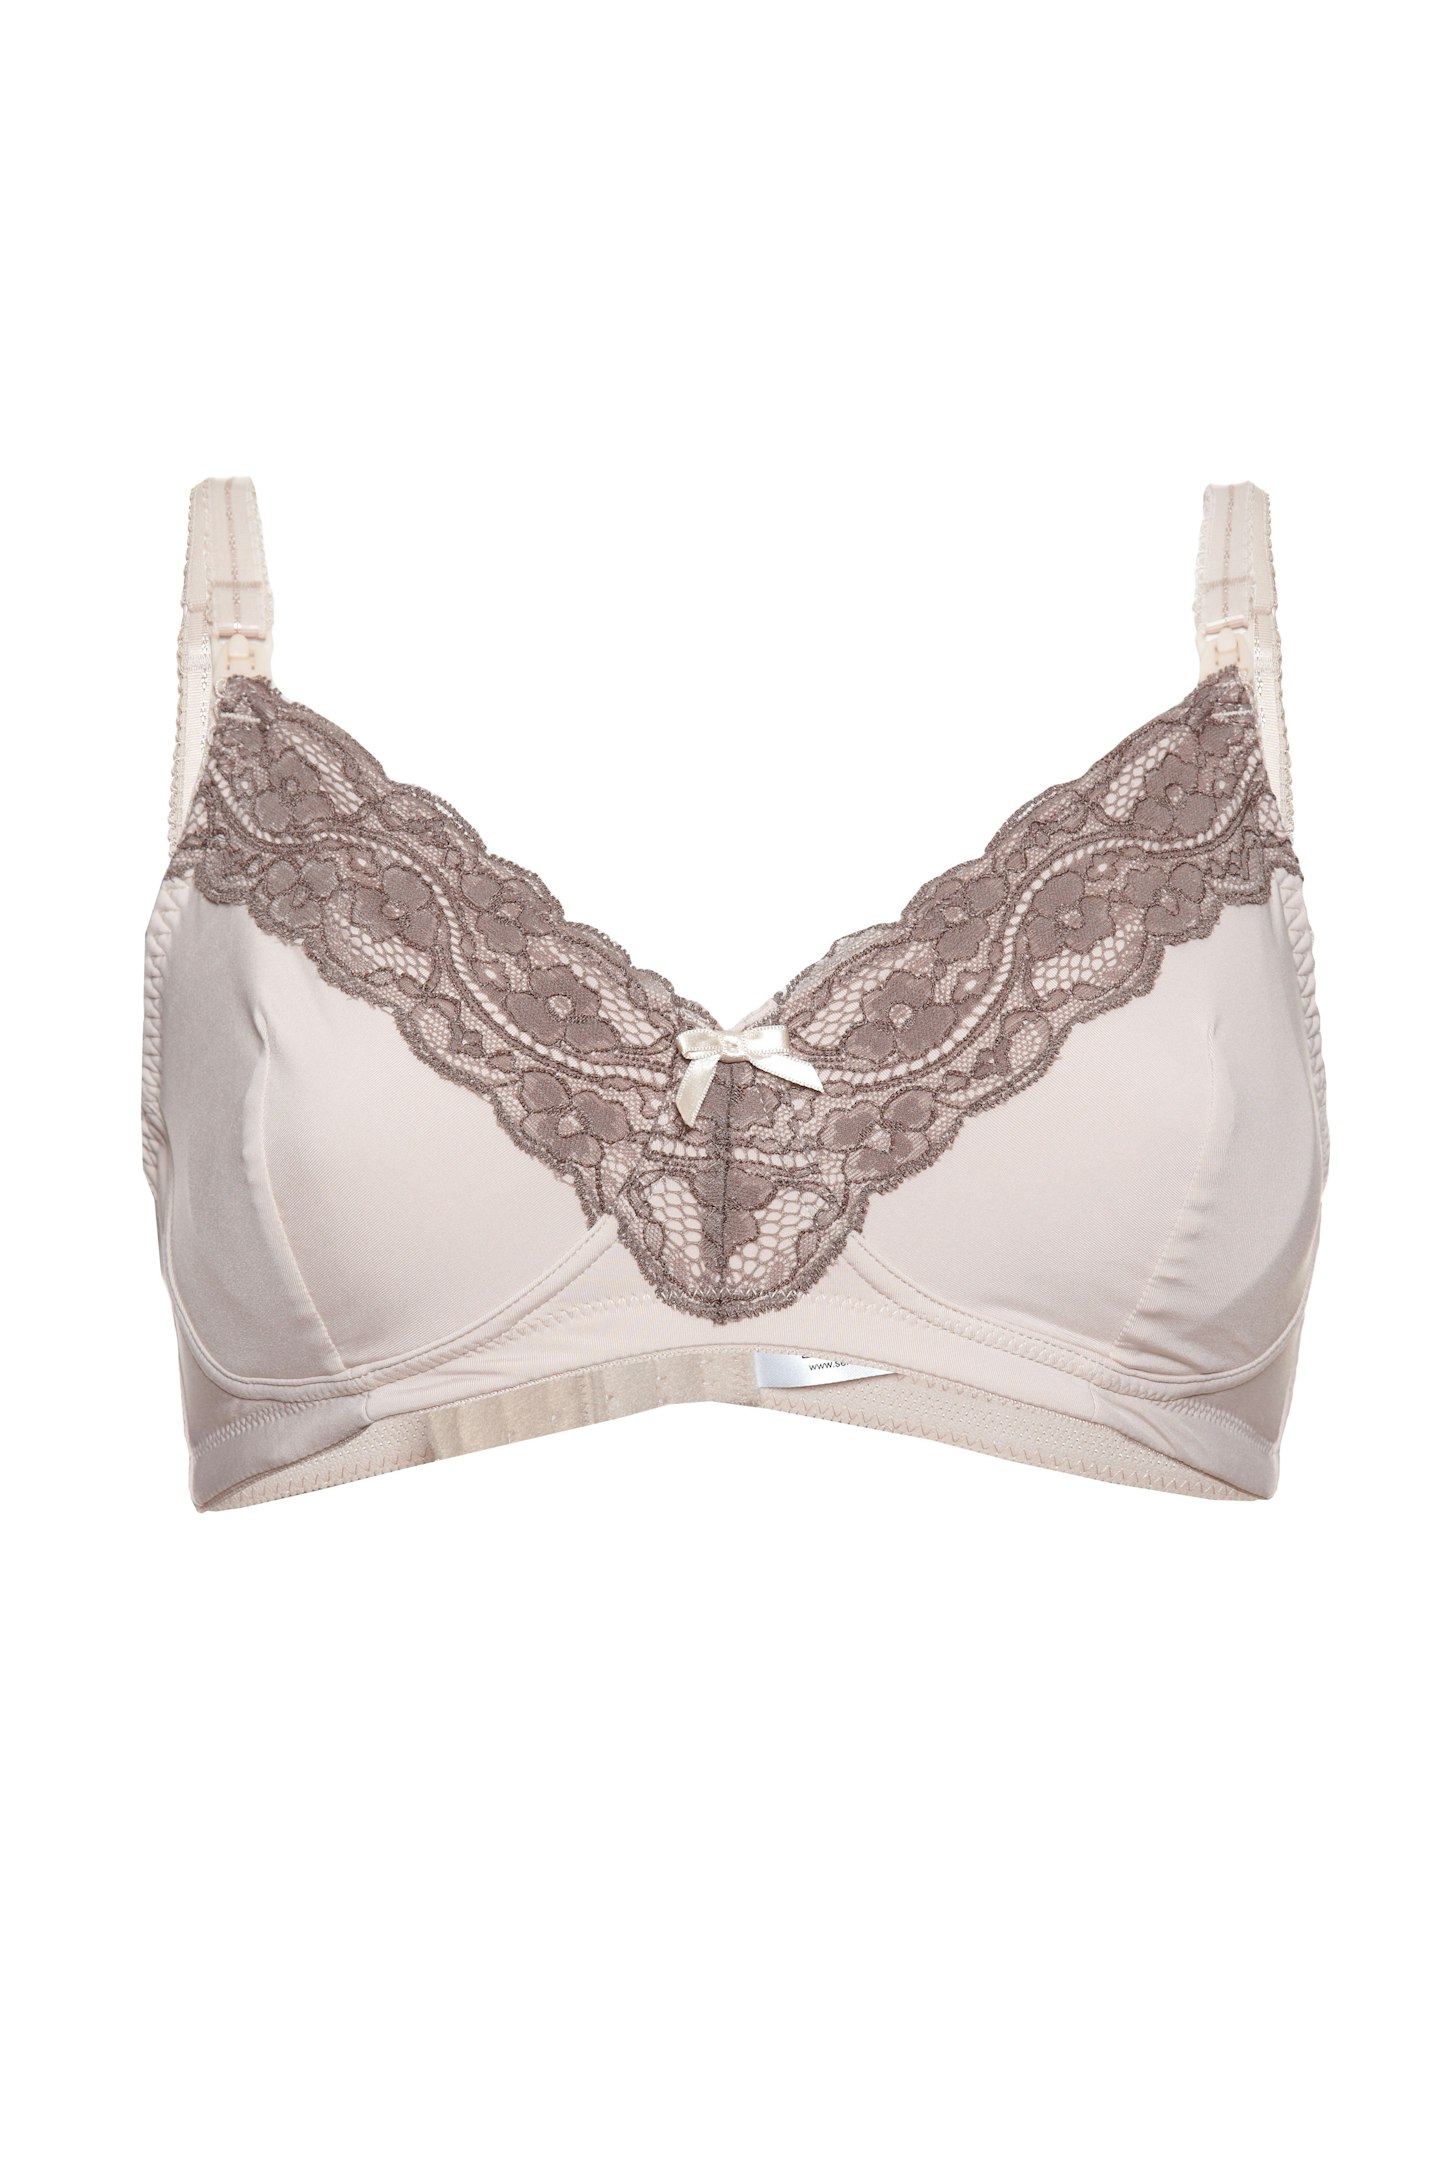 Seraphine Lace Trim Maternity And Nursing Bra in Natural